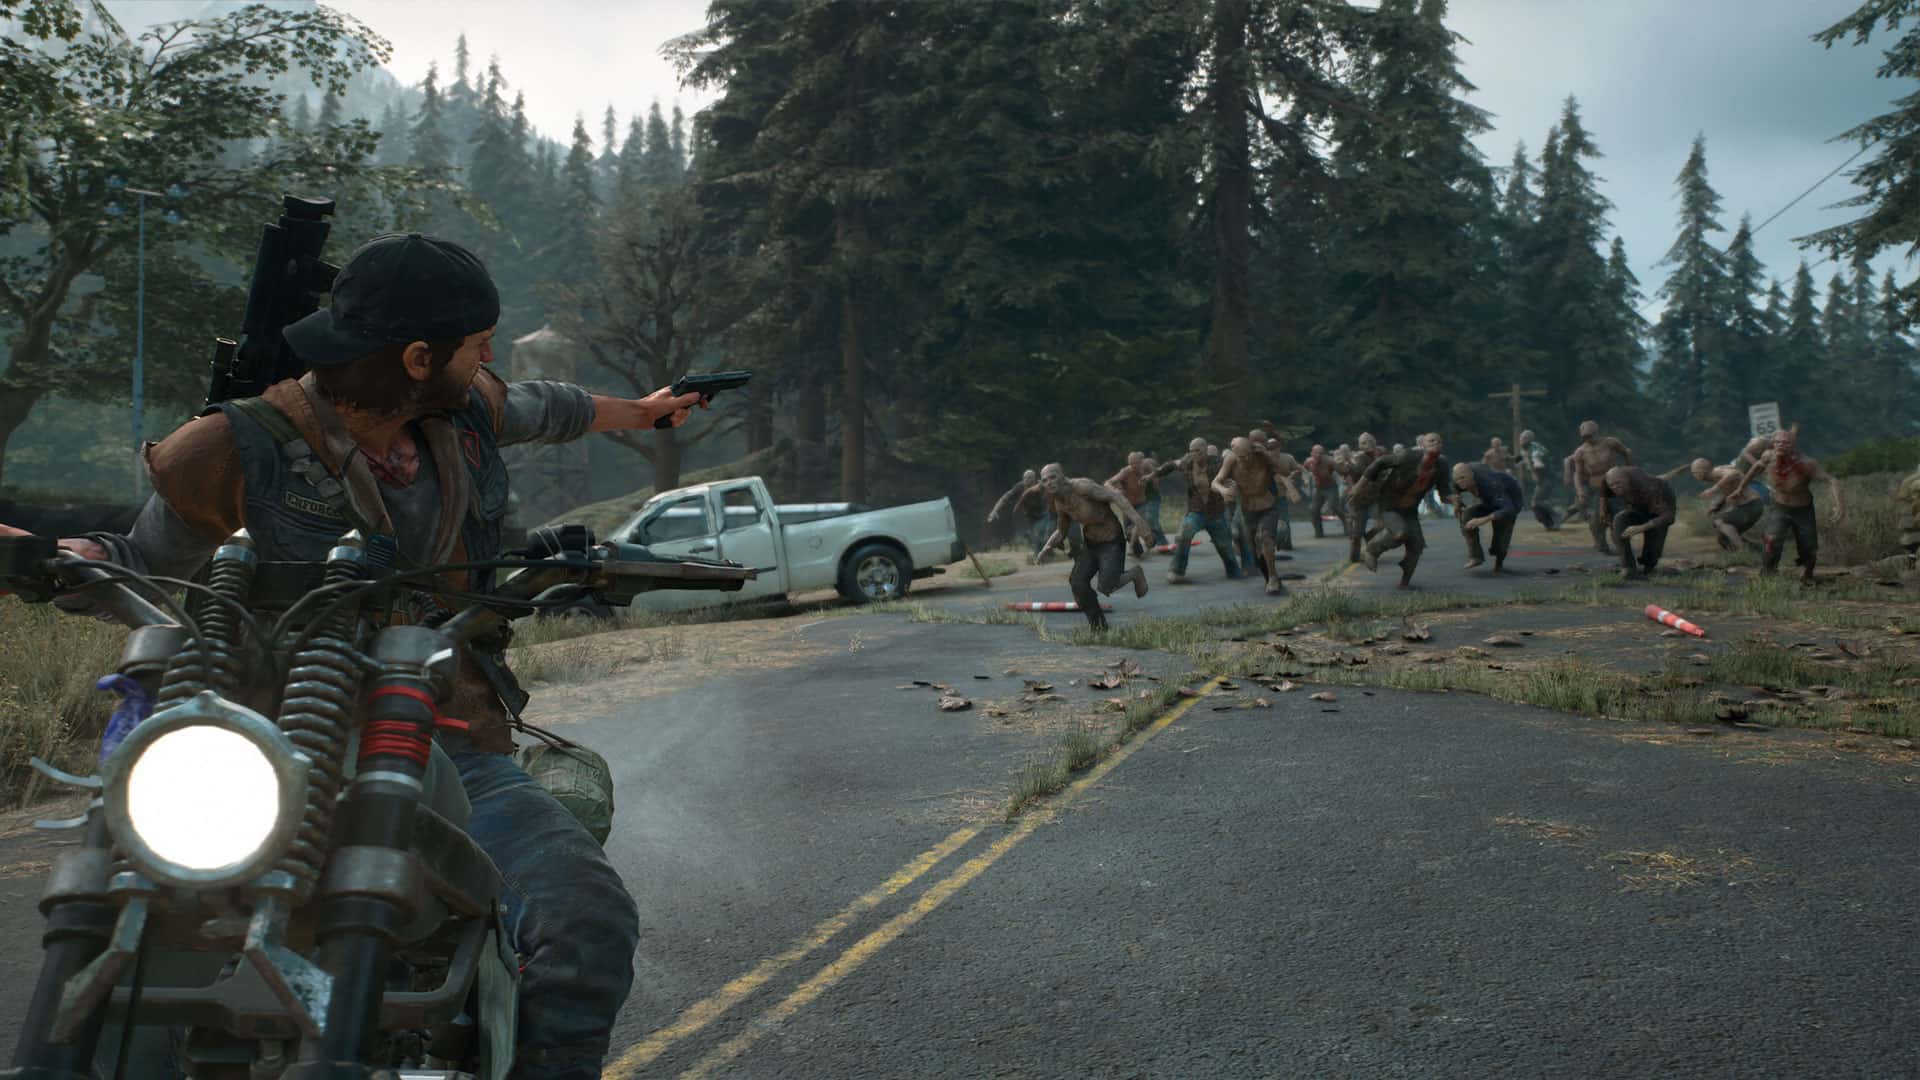 days gone ps4 sales